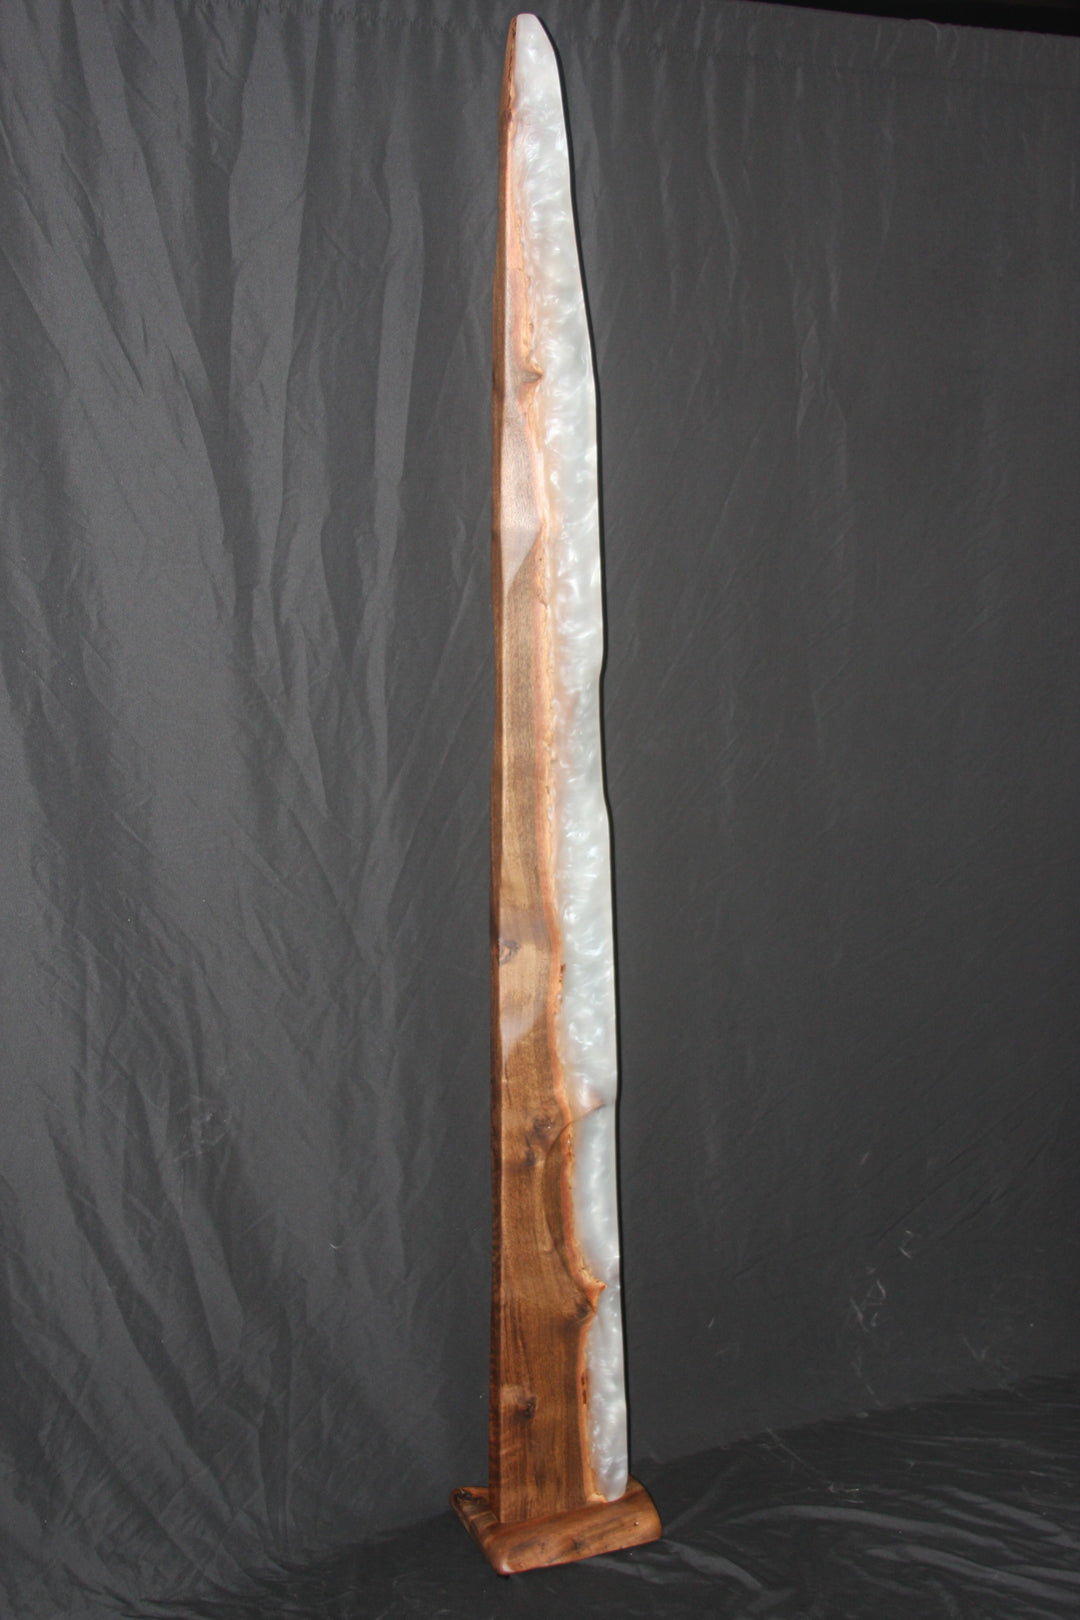 Live edge claro walnut with cloudy white spire sculpture